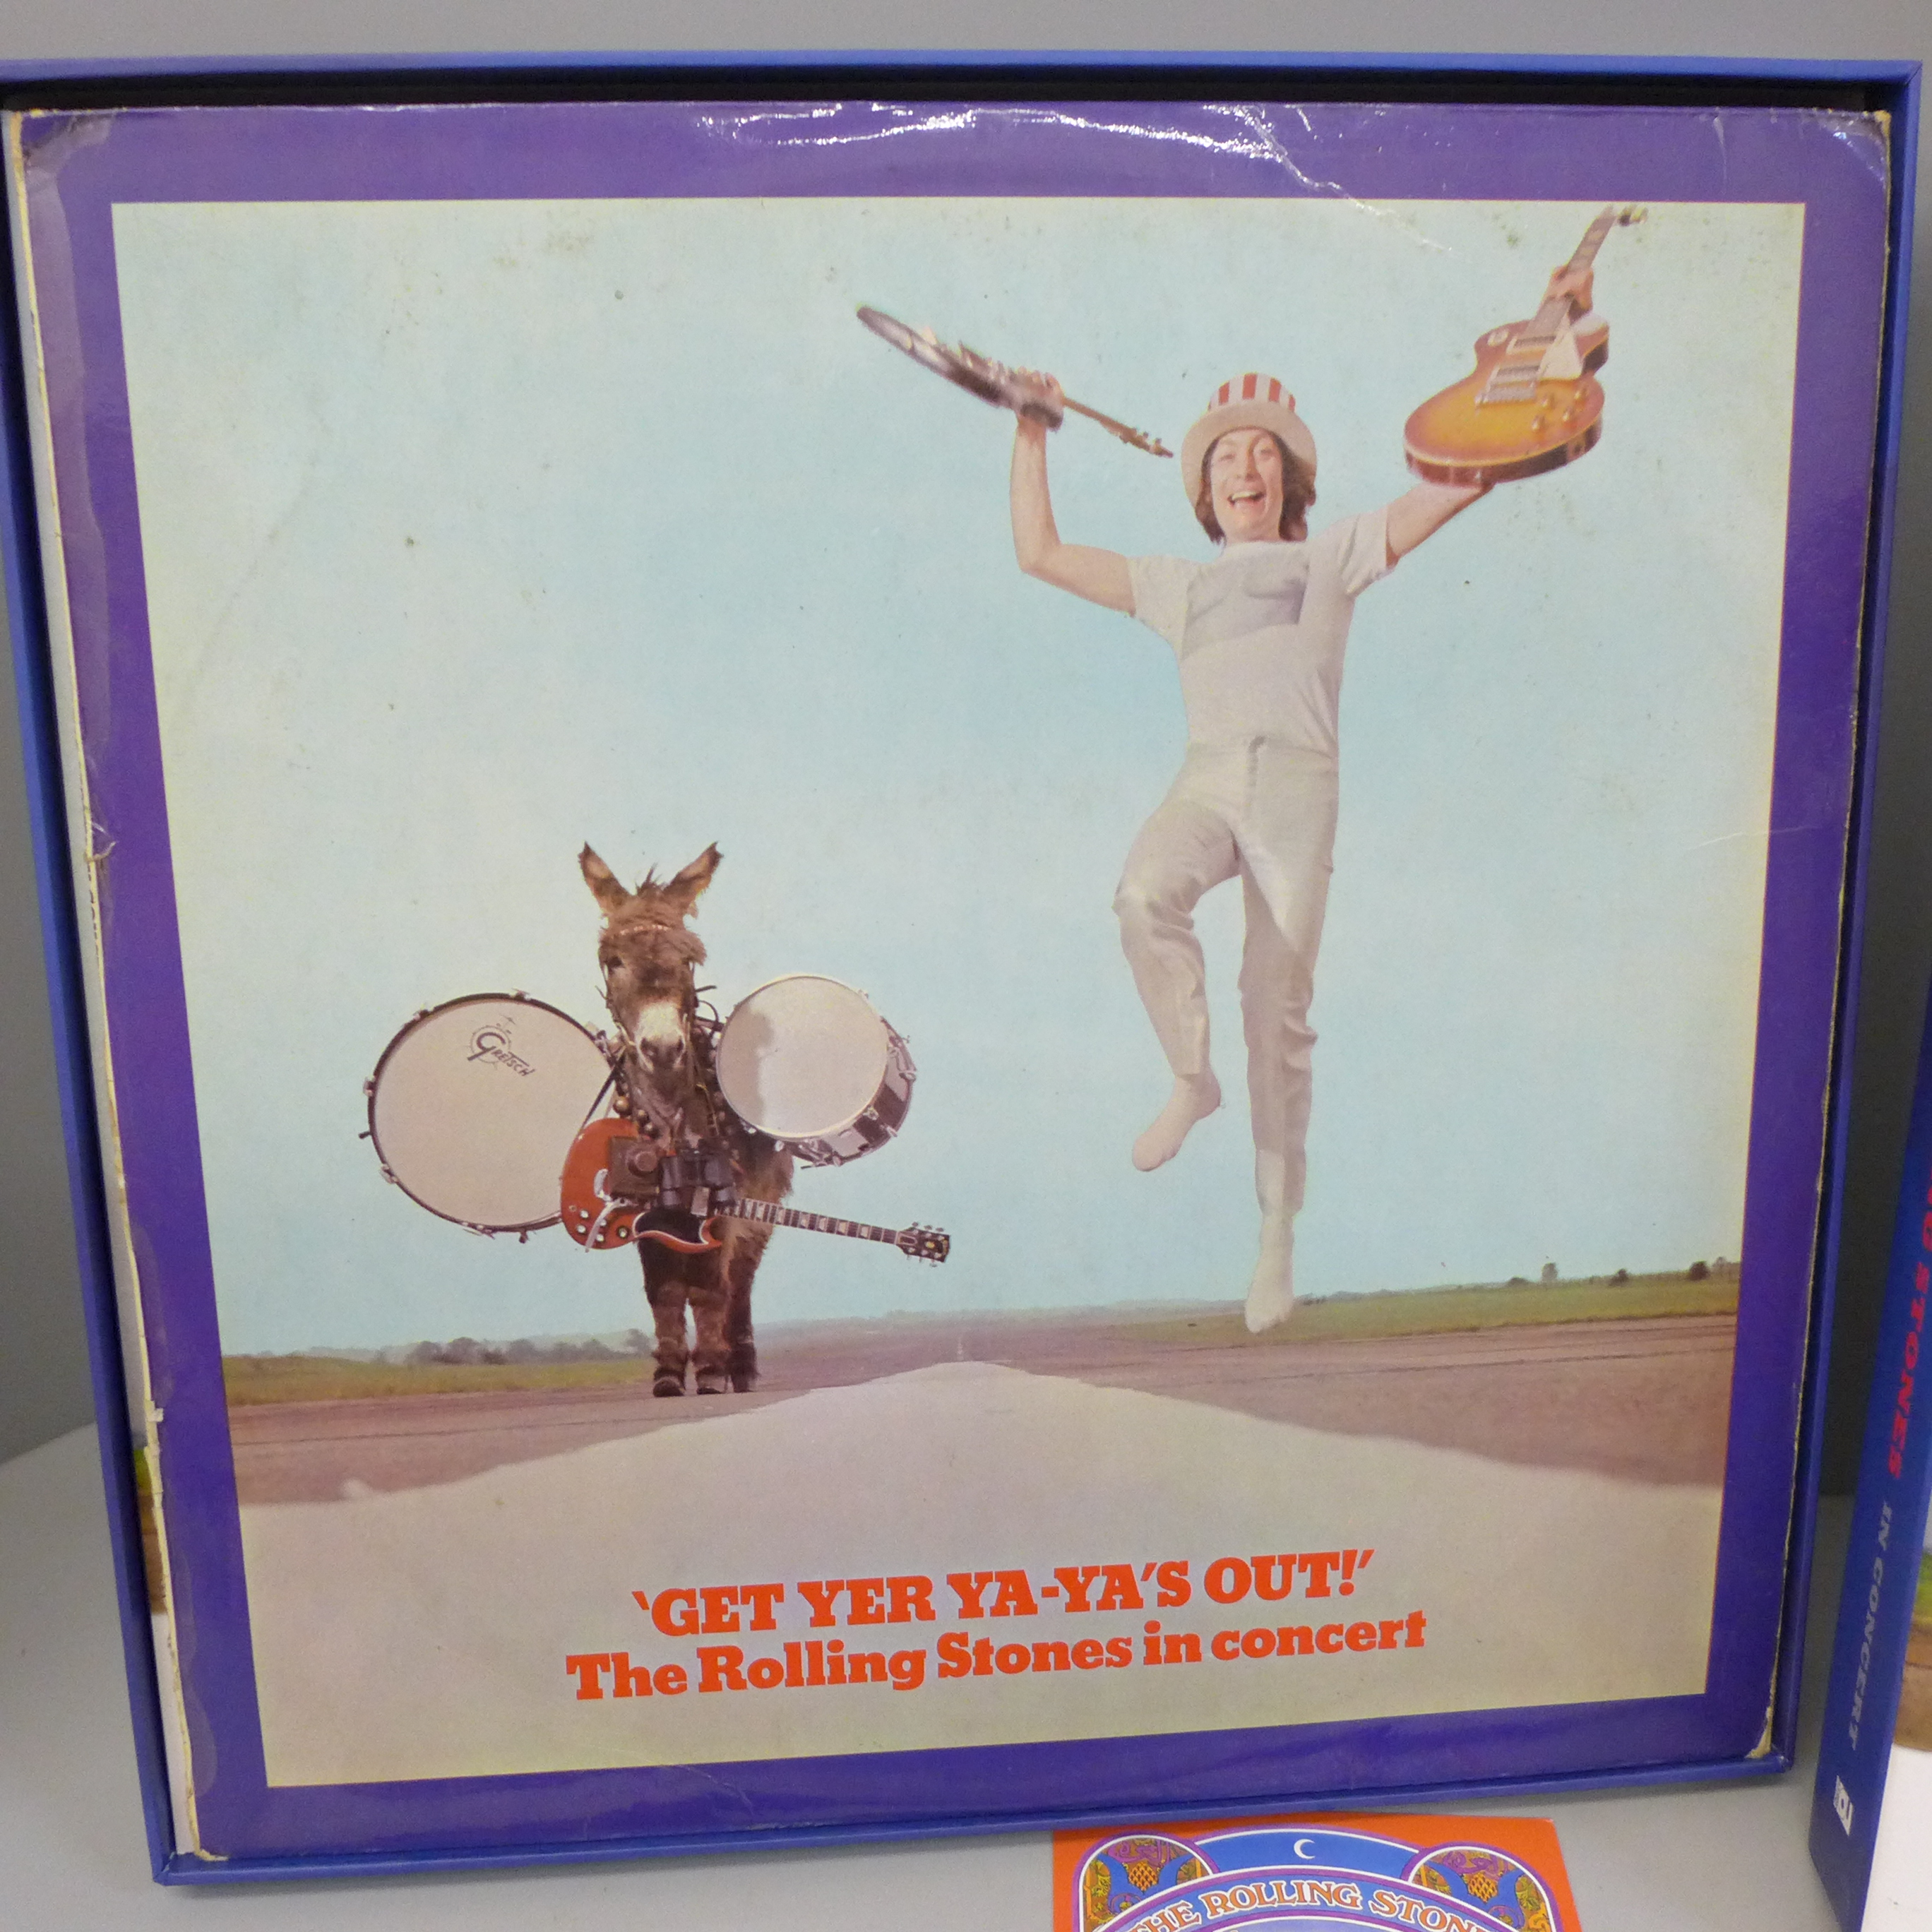 The Rolling Stones In Concert box set, Get Yer Ya-Ya's Out, LP/CD/DVD - Image 2 of 4